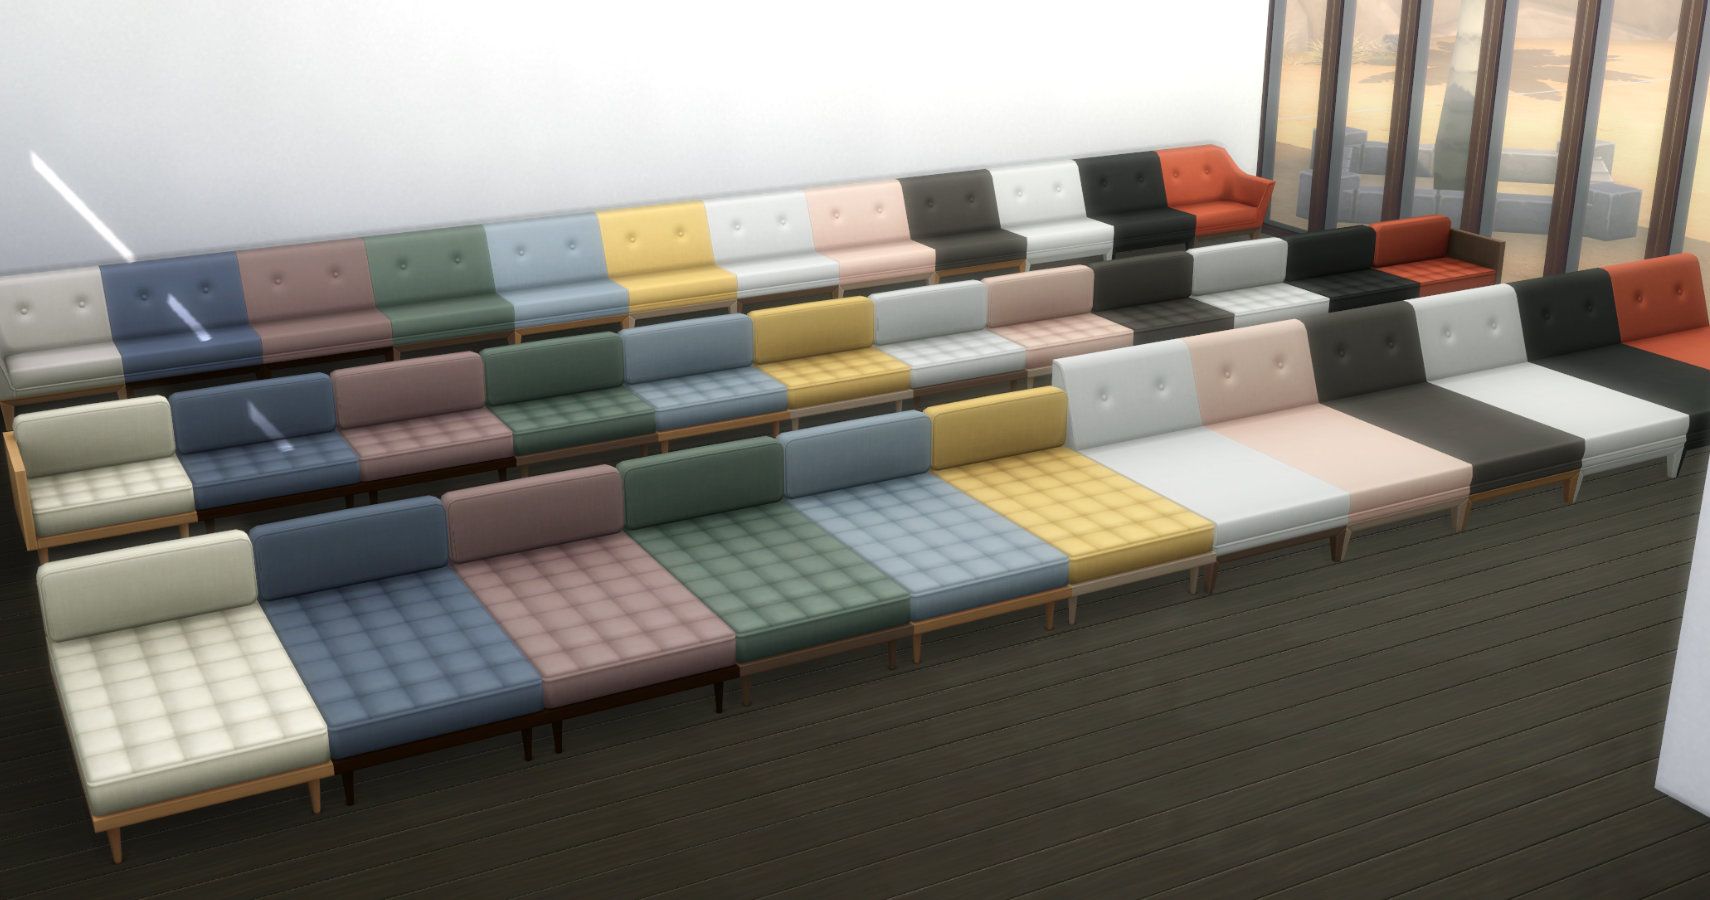 all sofa swatches in a line